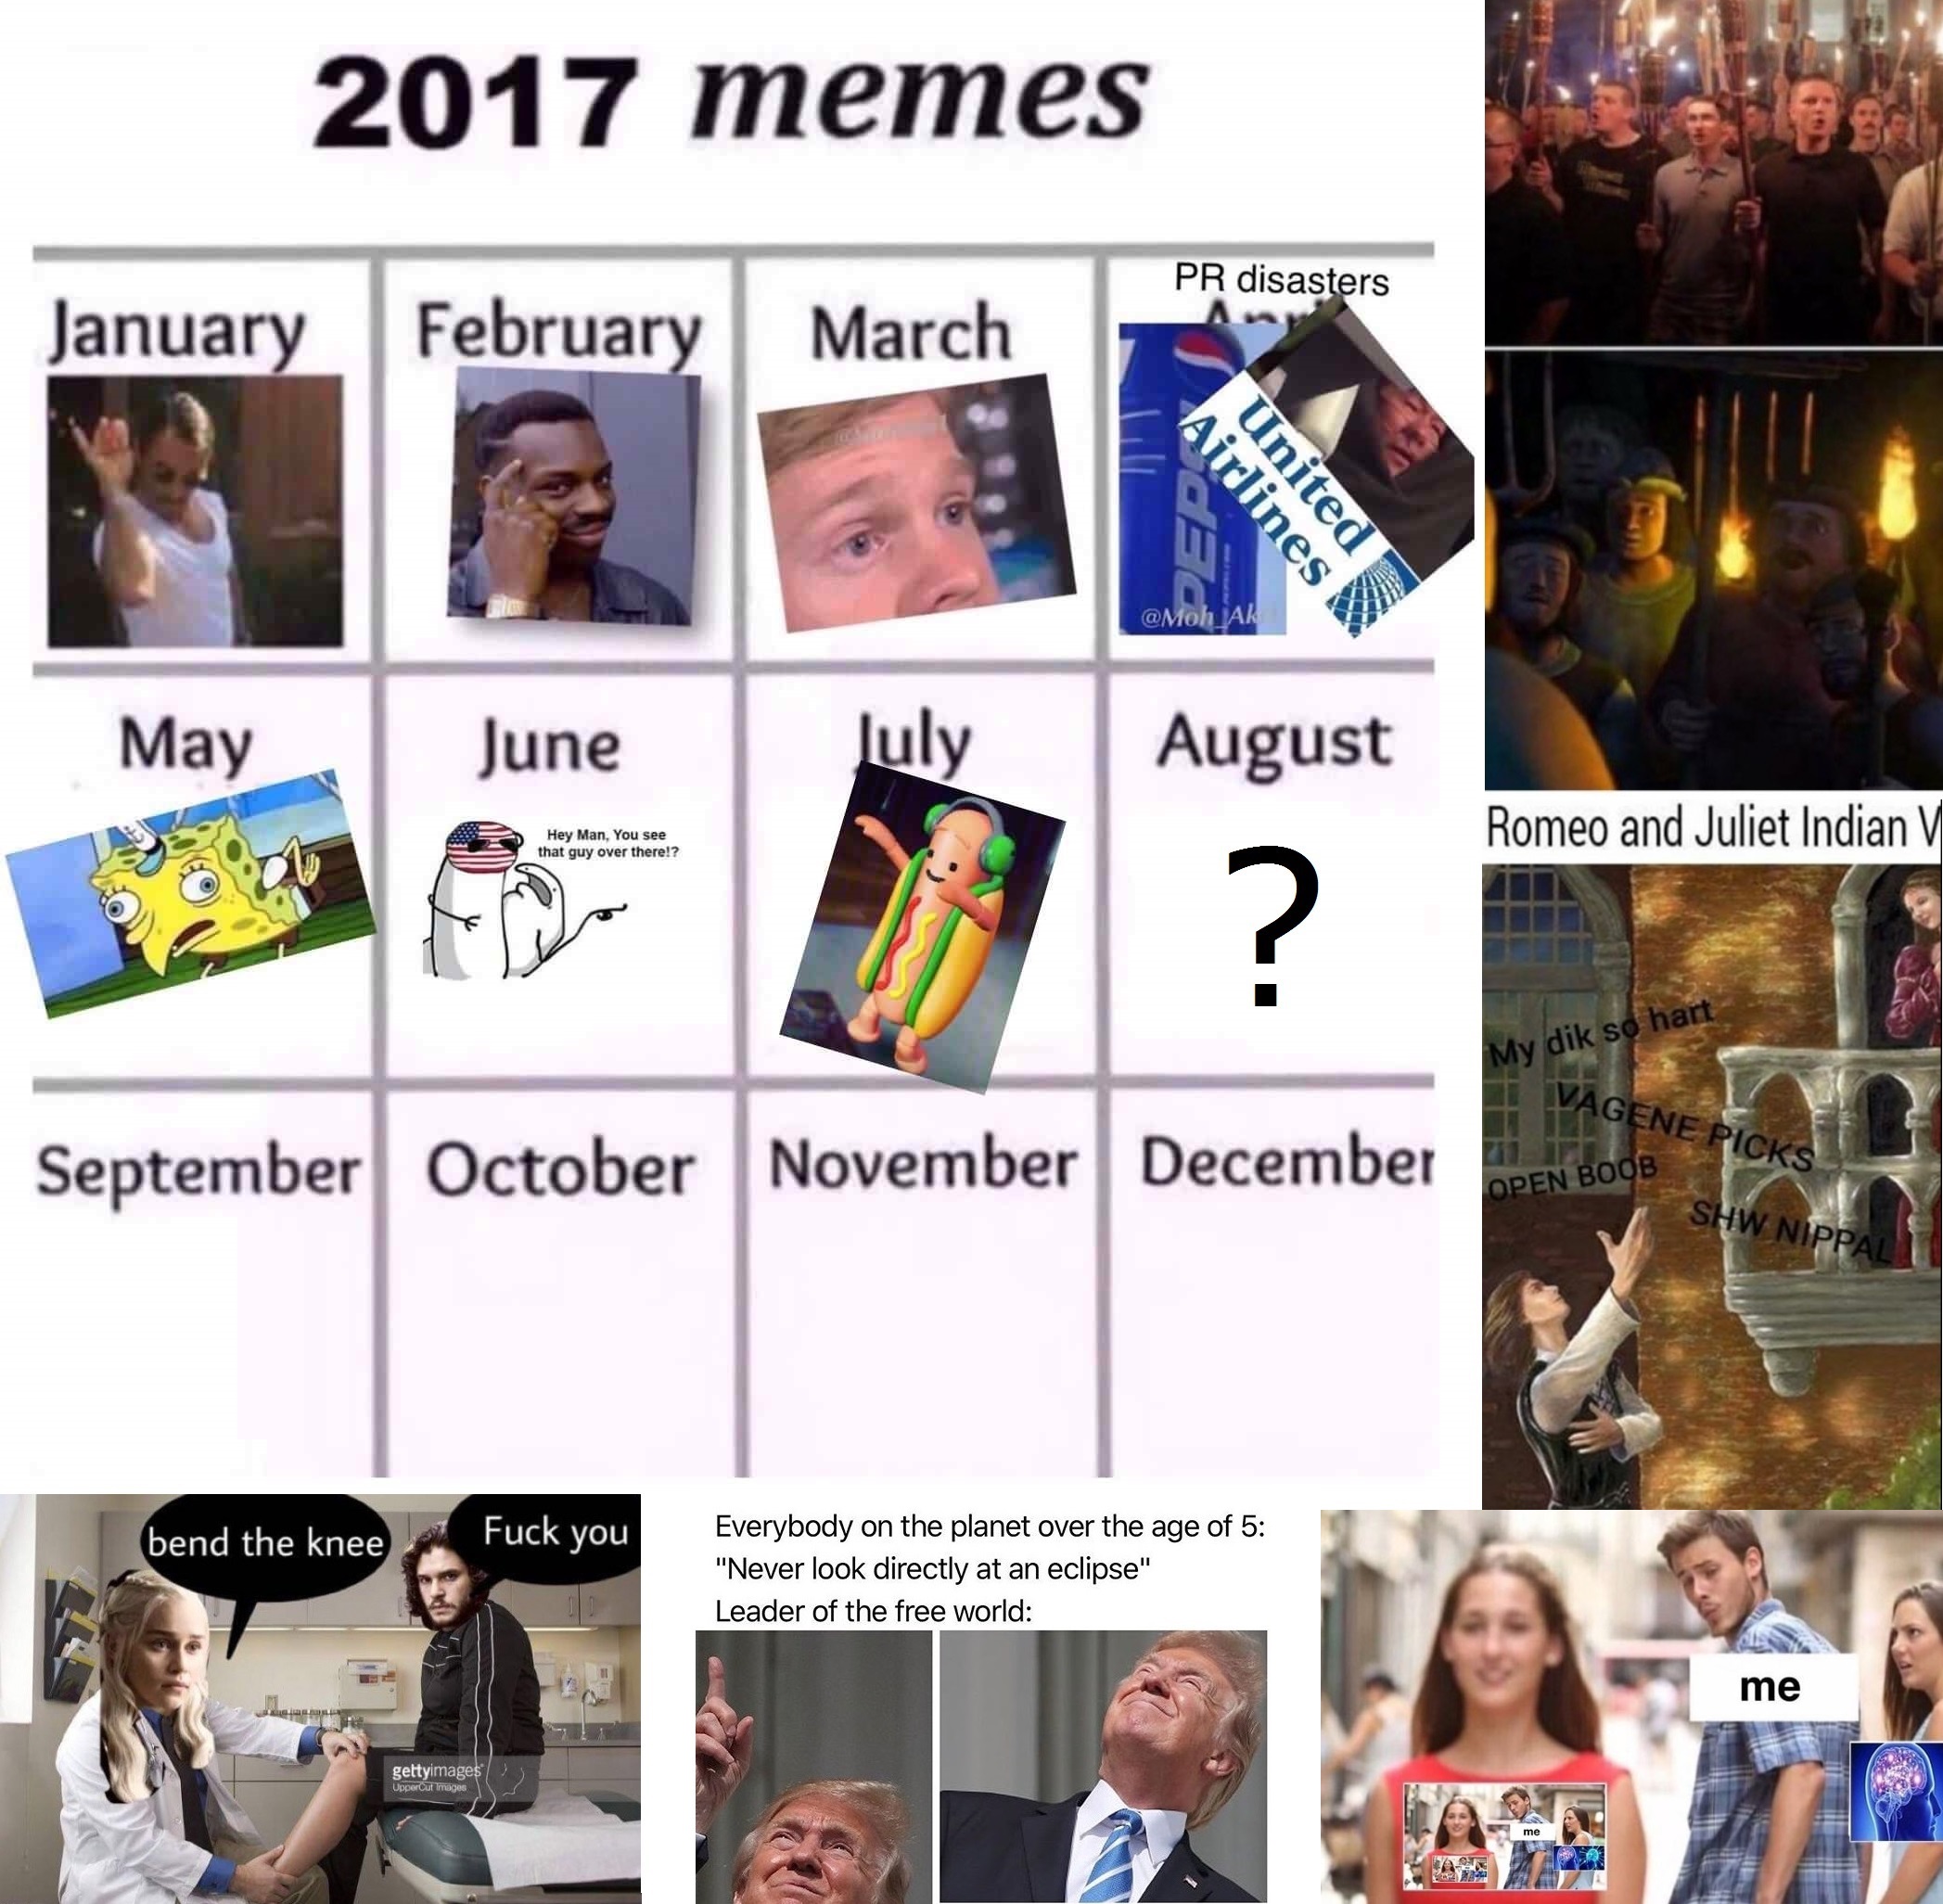 updated meme calendar - 2017 memes Pr disasters January February March irlines United May June July August Romeo and Juliet Indian V Mydik Va Cene September October November December bend the knee Fuck you Everybody on the planet over the age of 5 "Never 